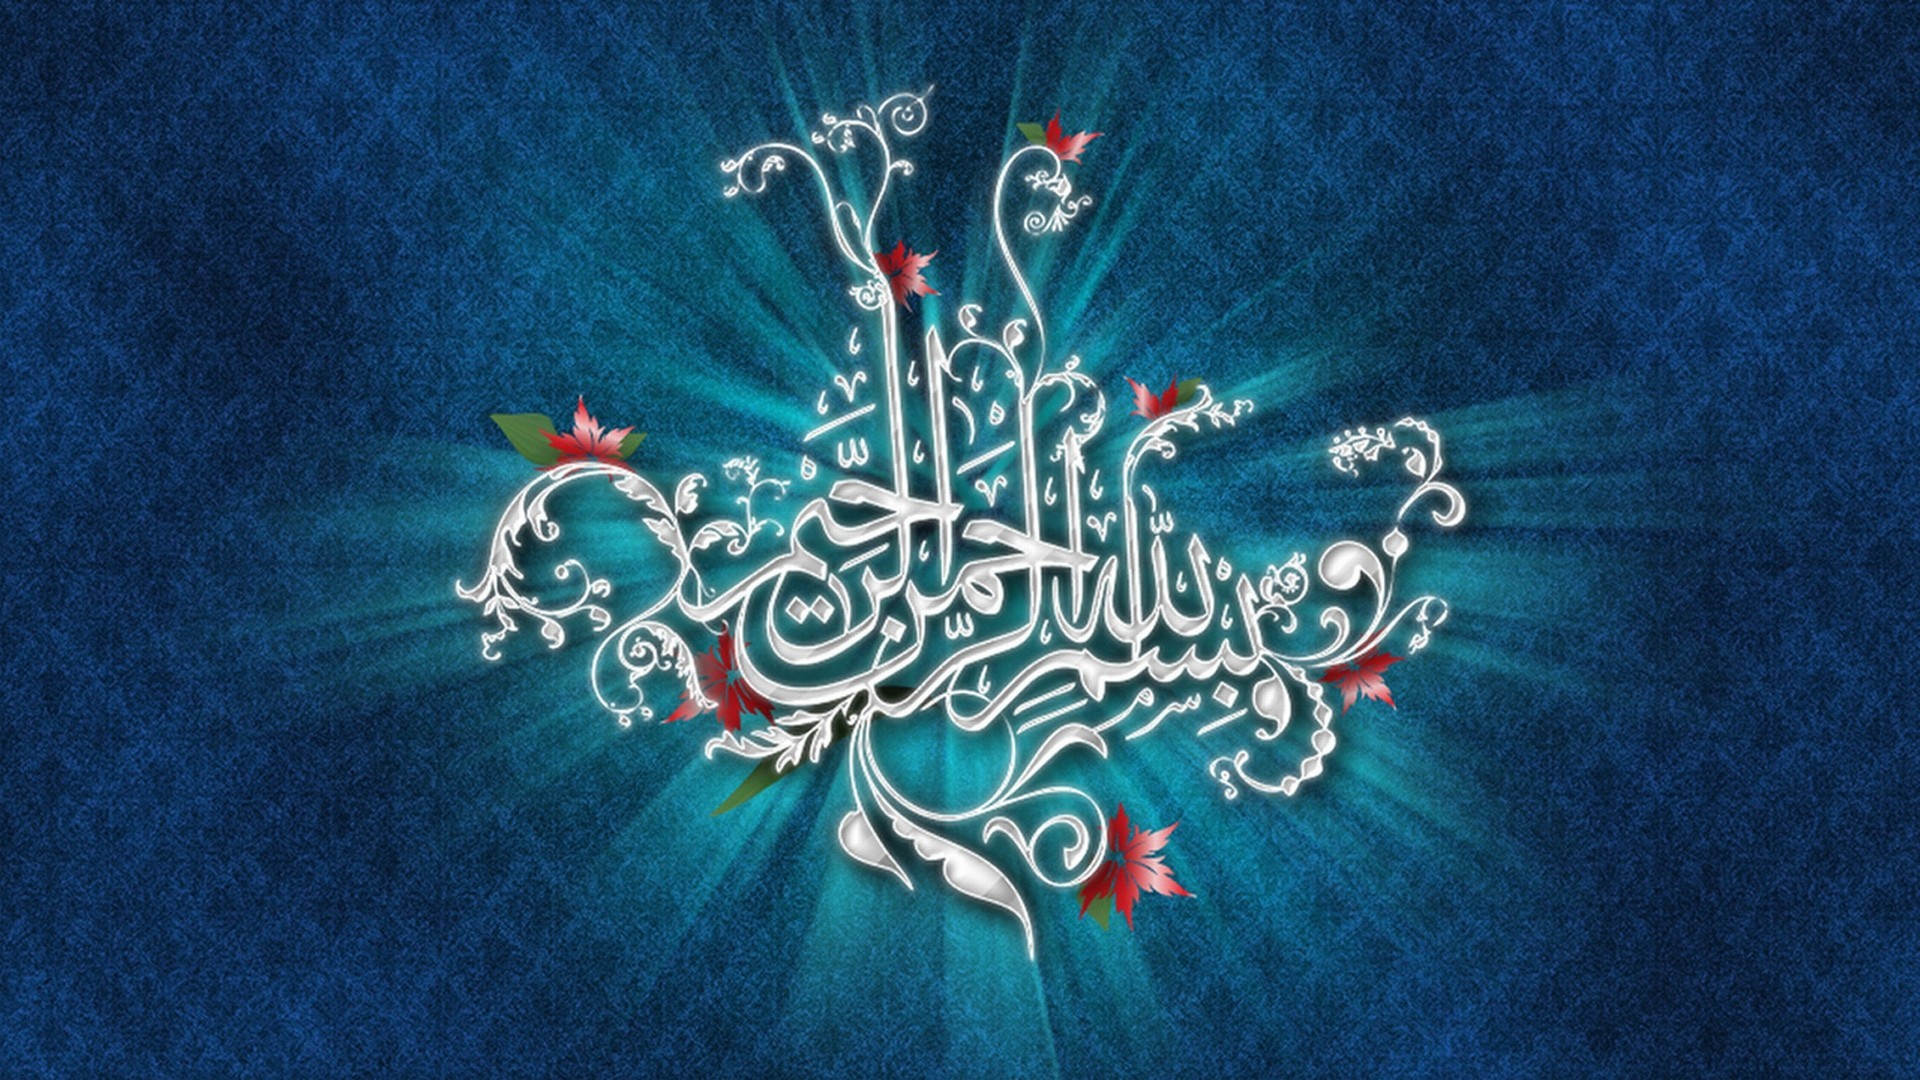 Full HD Islamic Wallpapers 1920x1080 (77+ images)